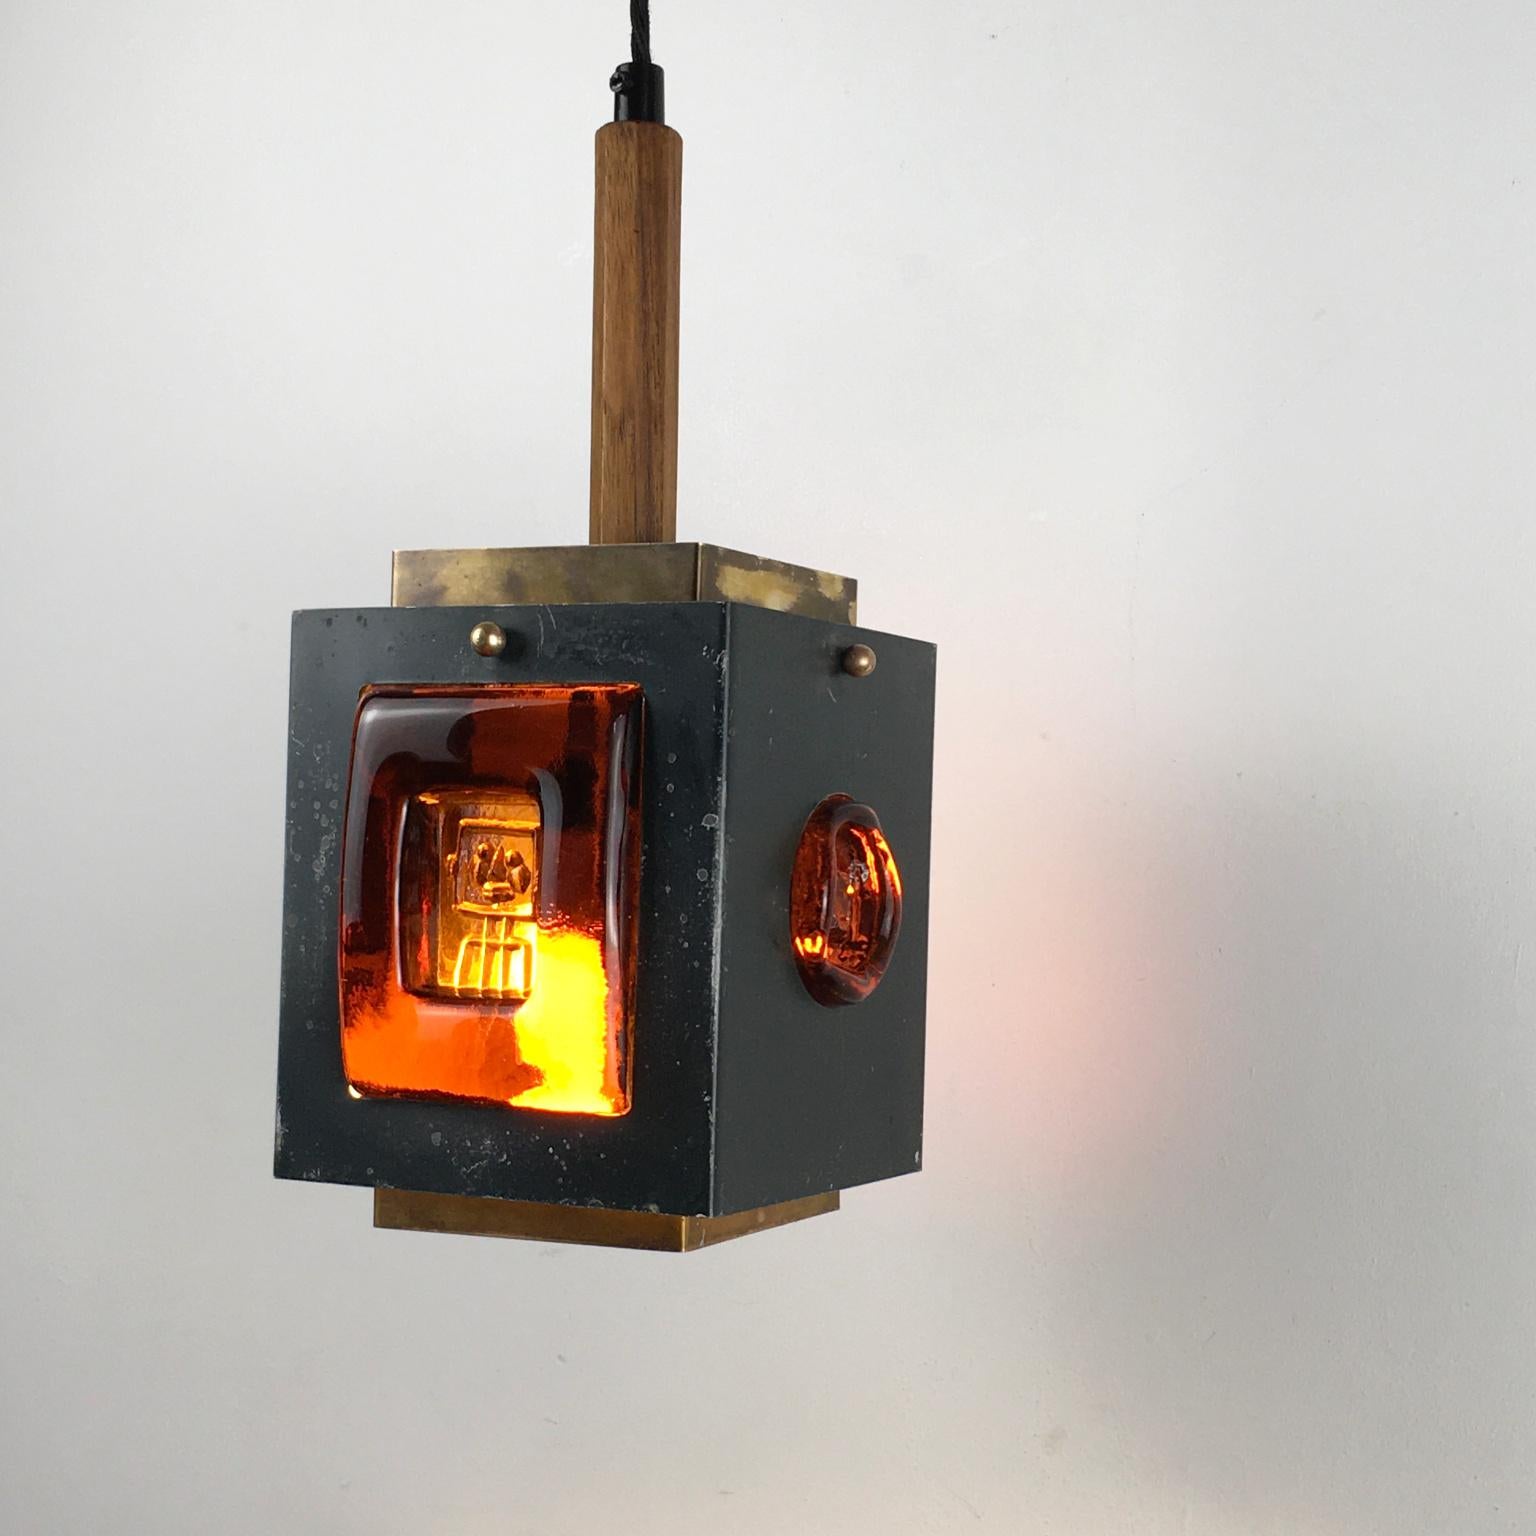 1960s Sweden suspension or pendant lamp, designed by Einar Backström and Erik Höglund for the glassmaker Boda Glasbruk (later known as Kosta Boda).
The enamel painted metal frame shows slight scratches and wear from previous use but the structure